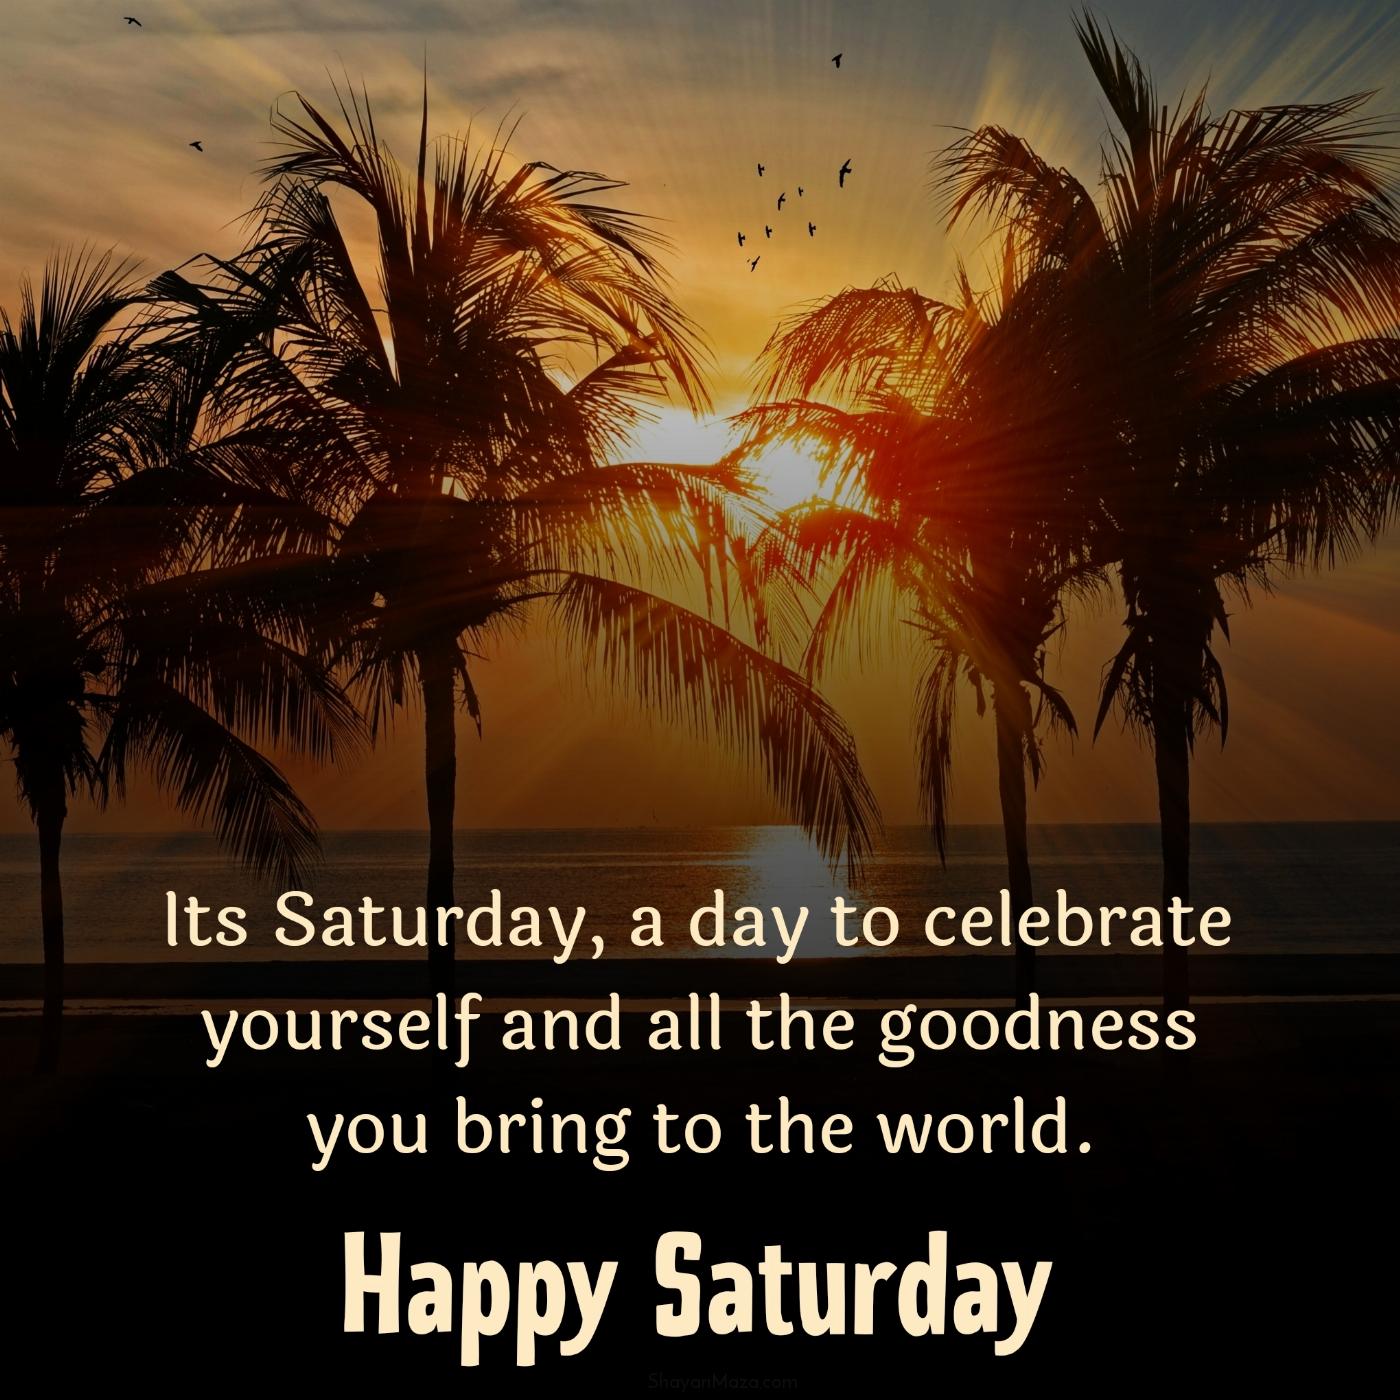 Its Saturday a day to celebrate yourself and all the goodness